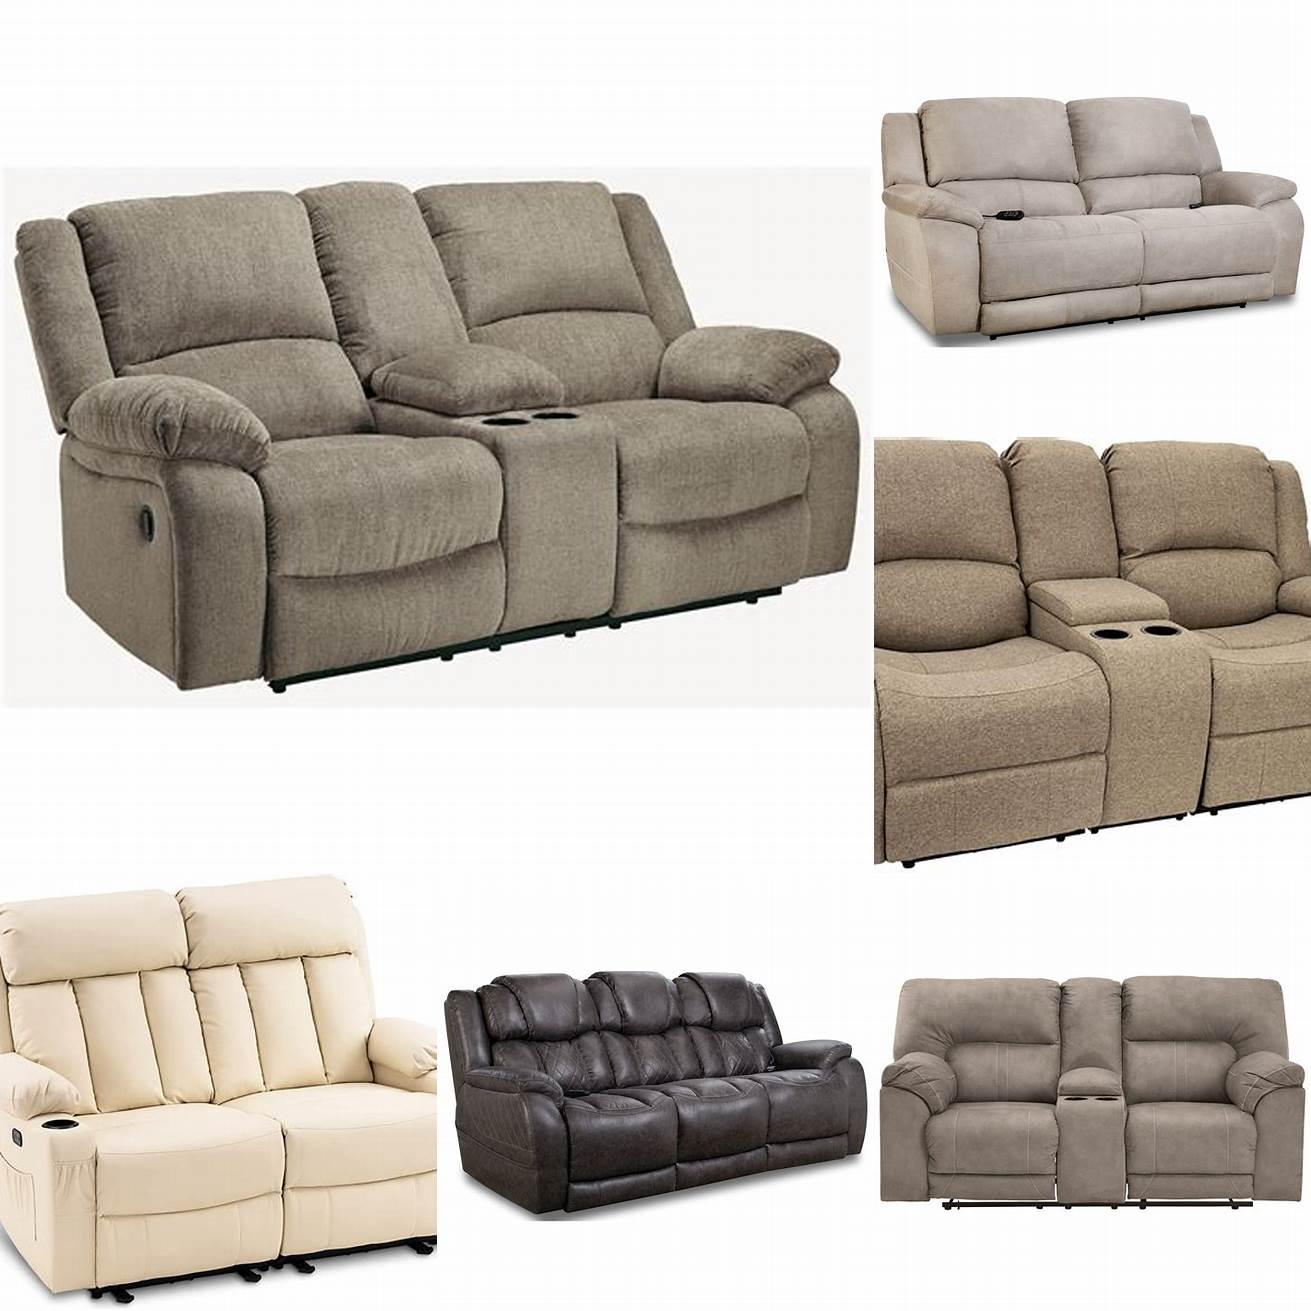 Manually operated double recliner sofa